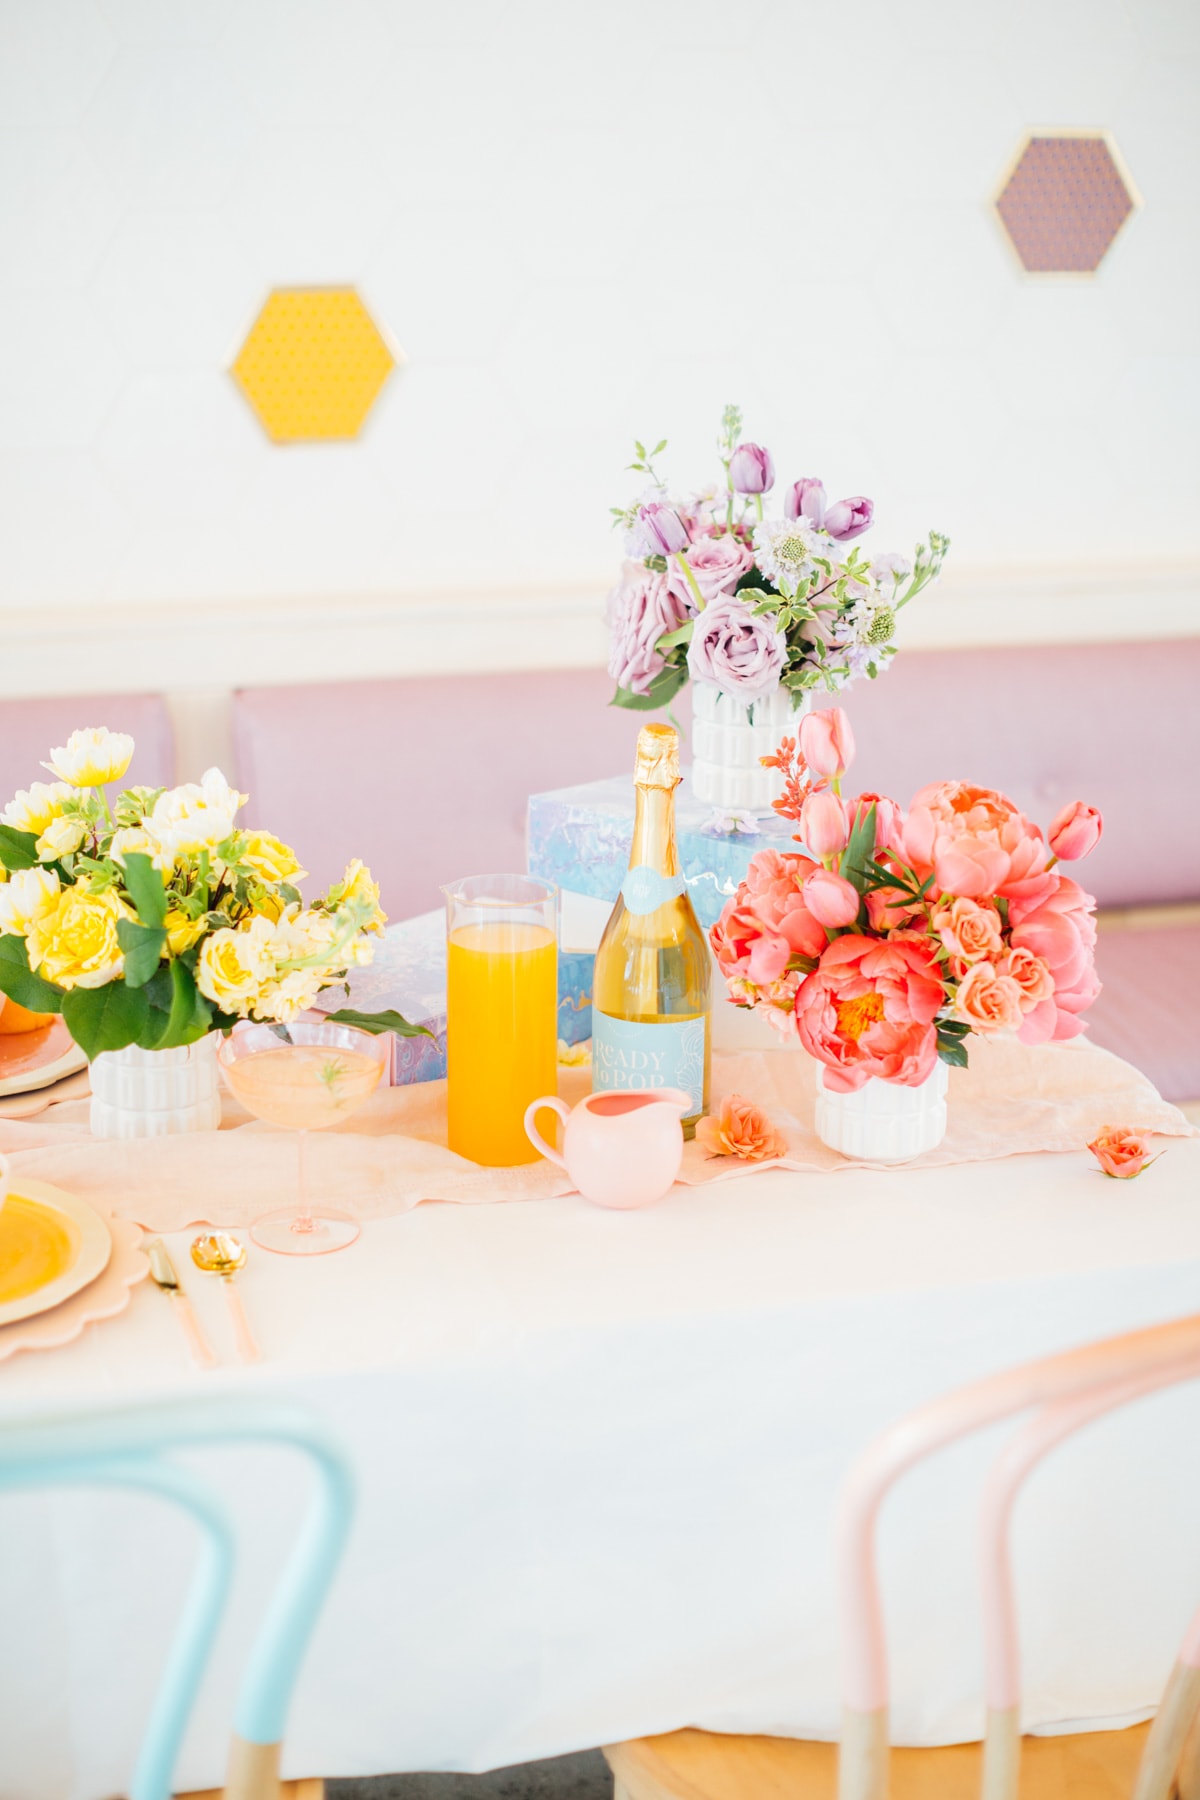 Ready to Pop Champagne - A Perfectly Pastel Easter Table Idea by top Houston lifestyle blogger Ashley Rose of Sugar & Cloth #diy #tablescape #ideas #easter #pastel #party #decorations #brunch #bridalshower #bridal #shower #baby